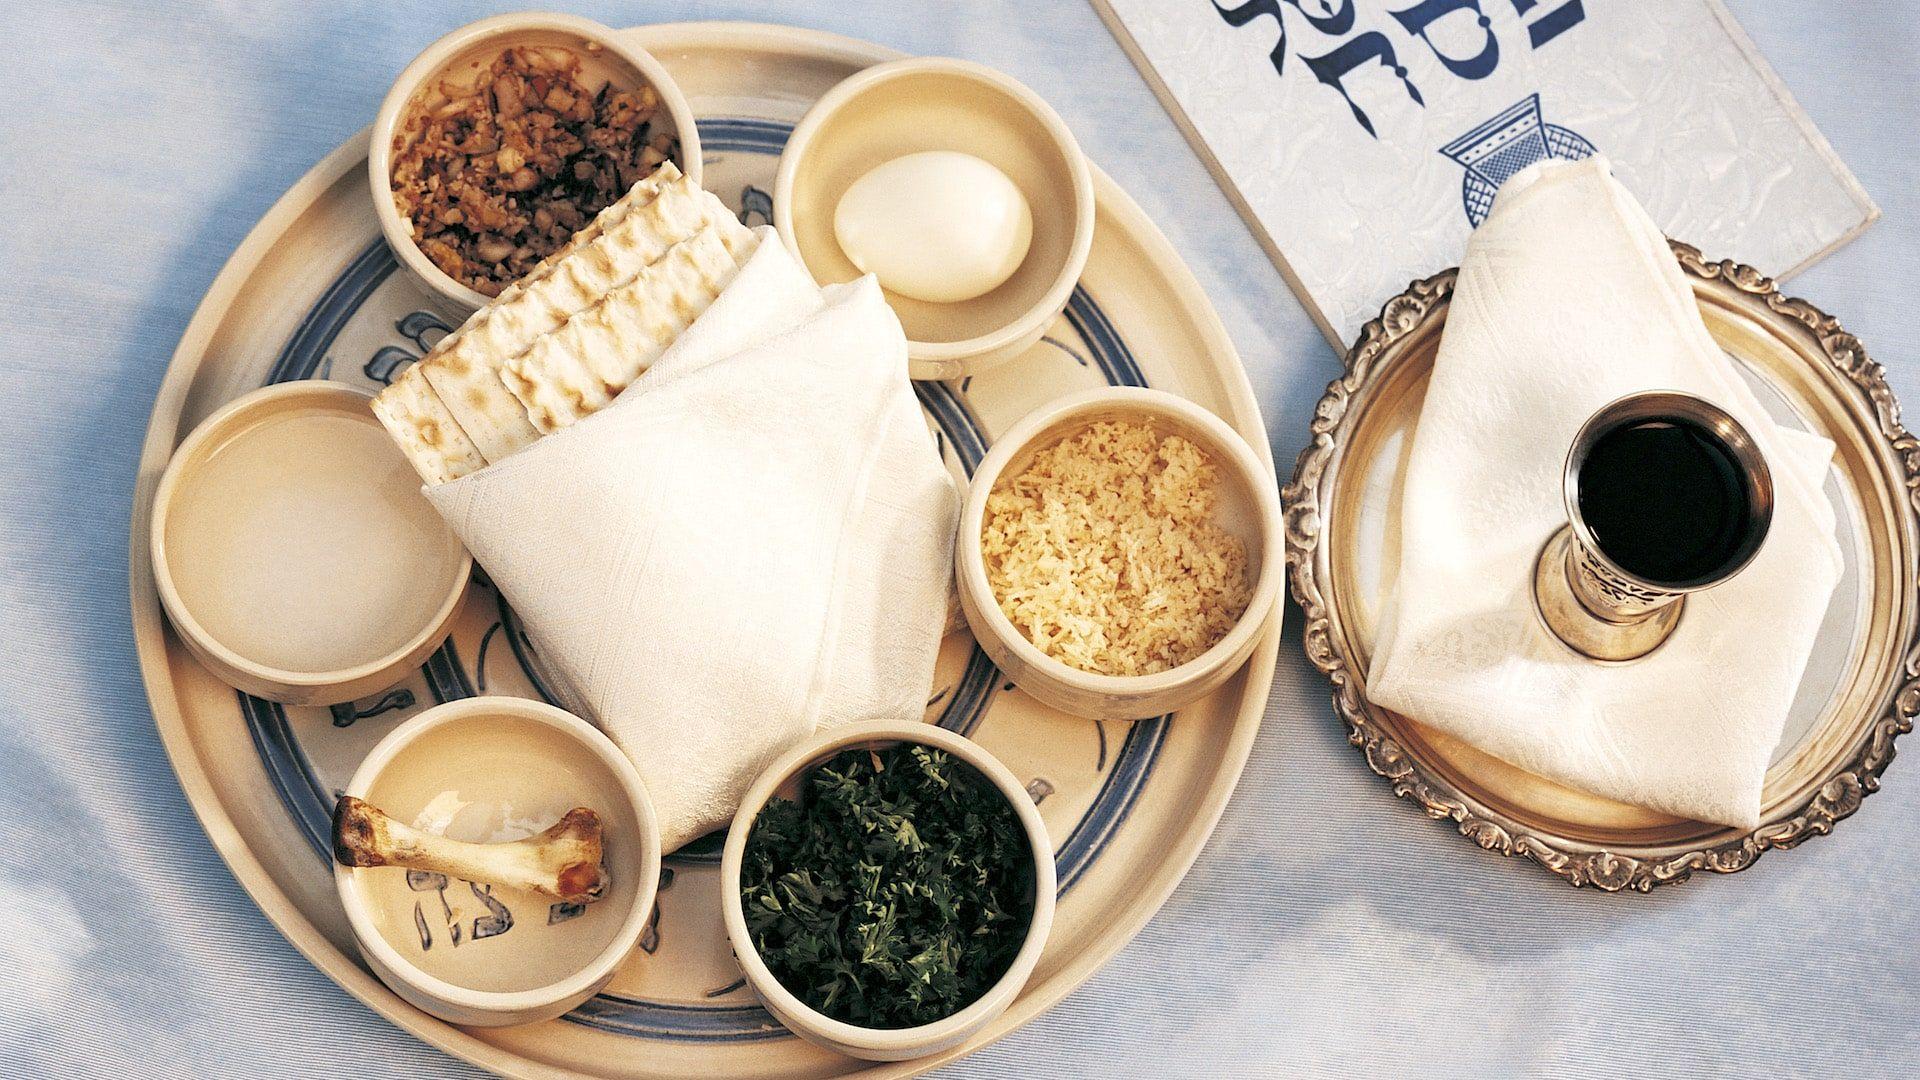 Here's the Meaning Behind the Passover Seder Plate